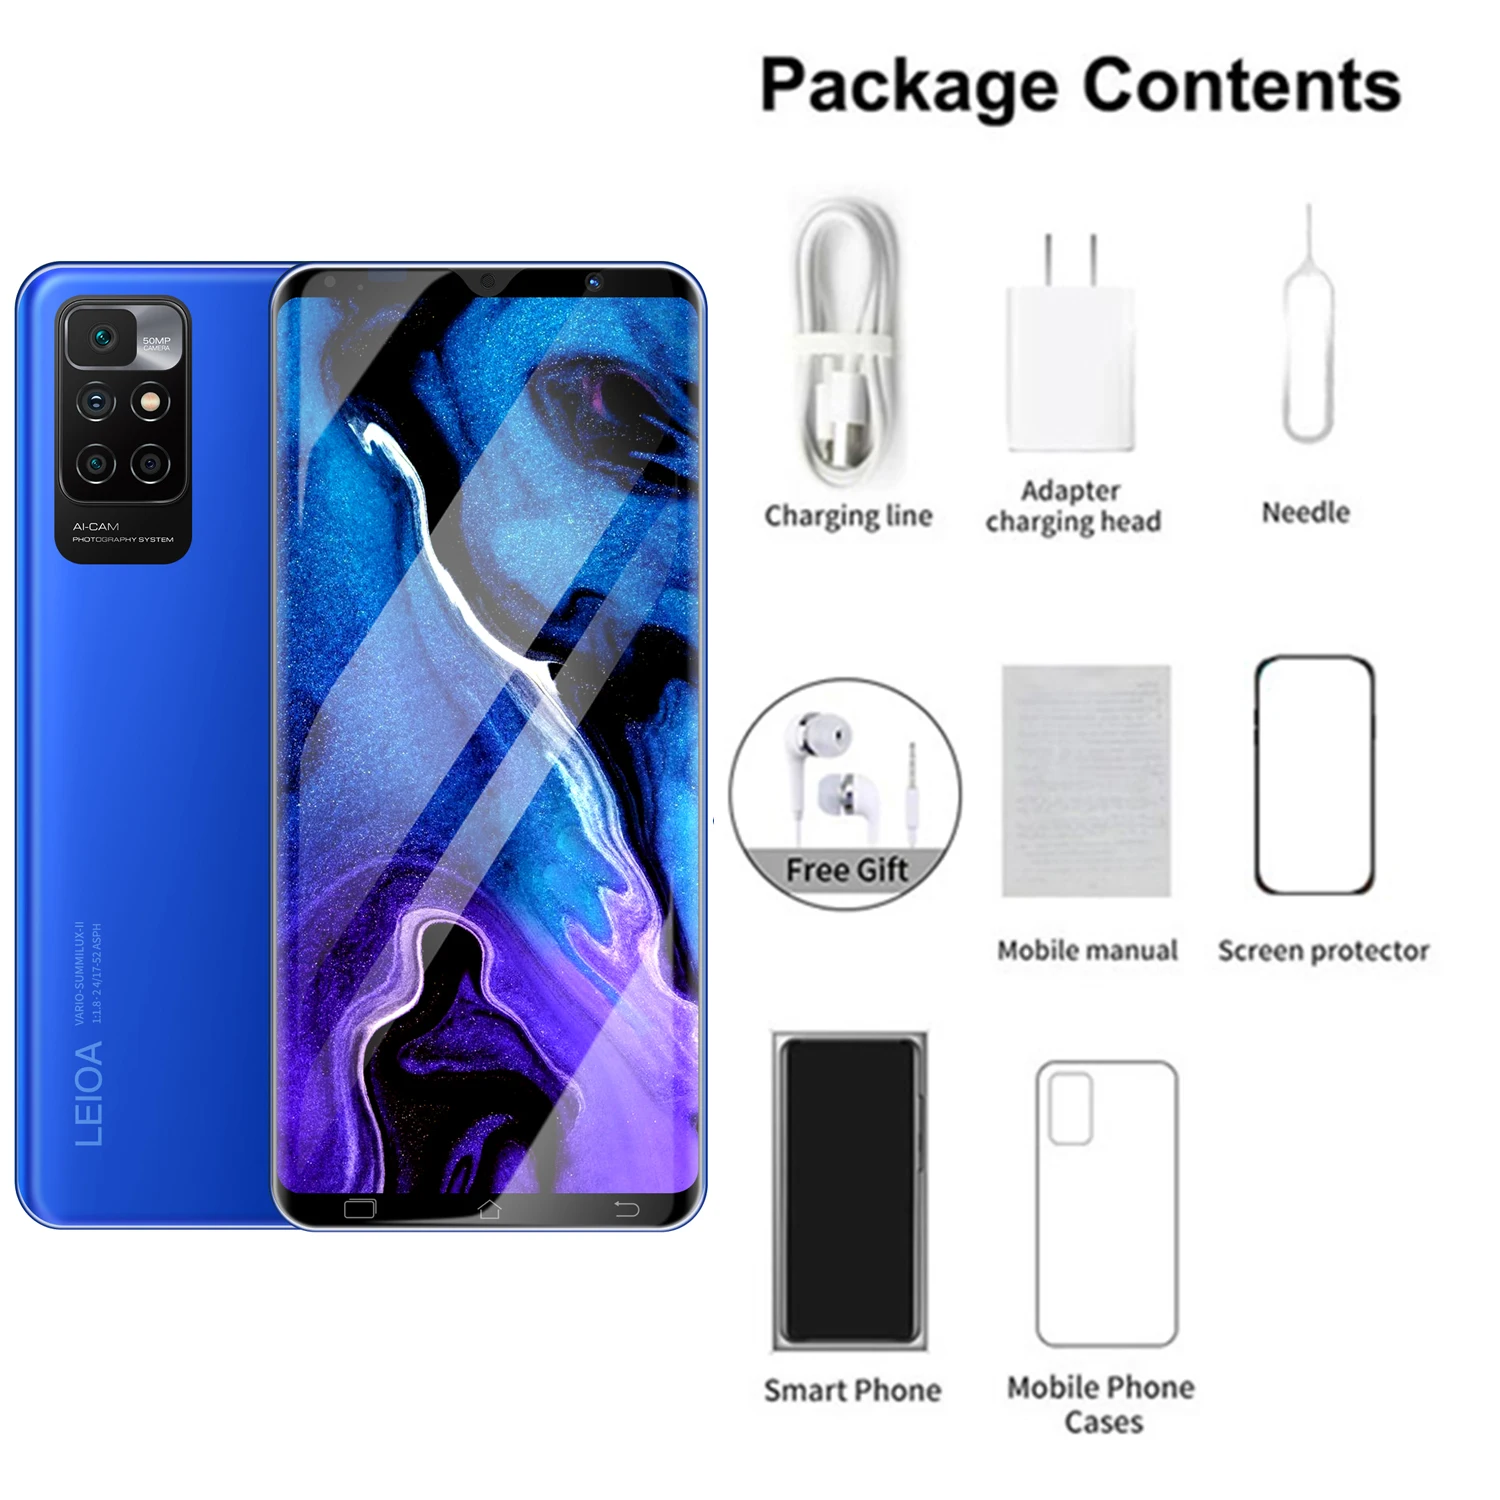 Global Version Note11 Pro Cellphones 8GB 256GB Full Screen Mobile Phones 5.8Inch HD Smartphones 24+48MP Camera 5000mAh Android10 images - 6